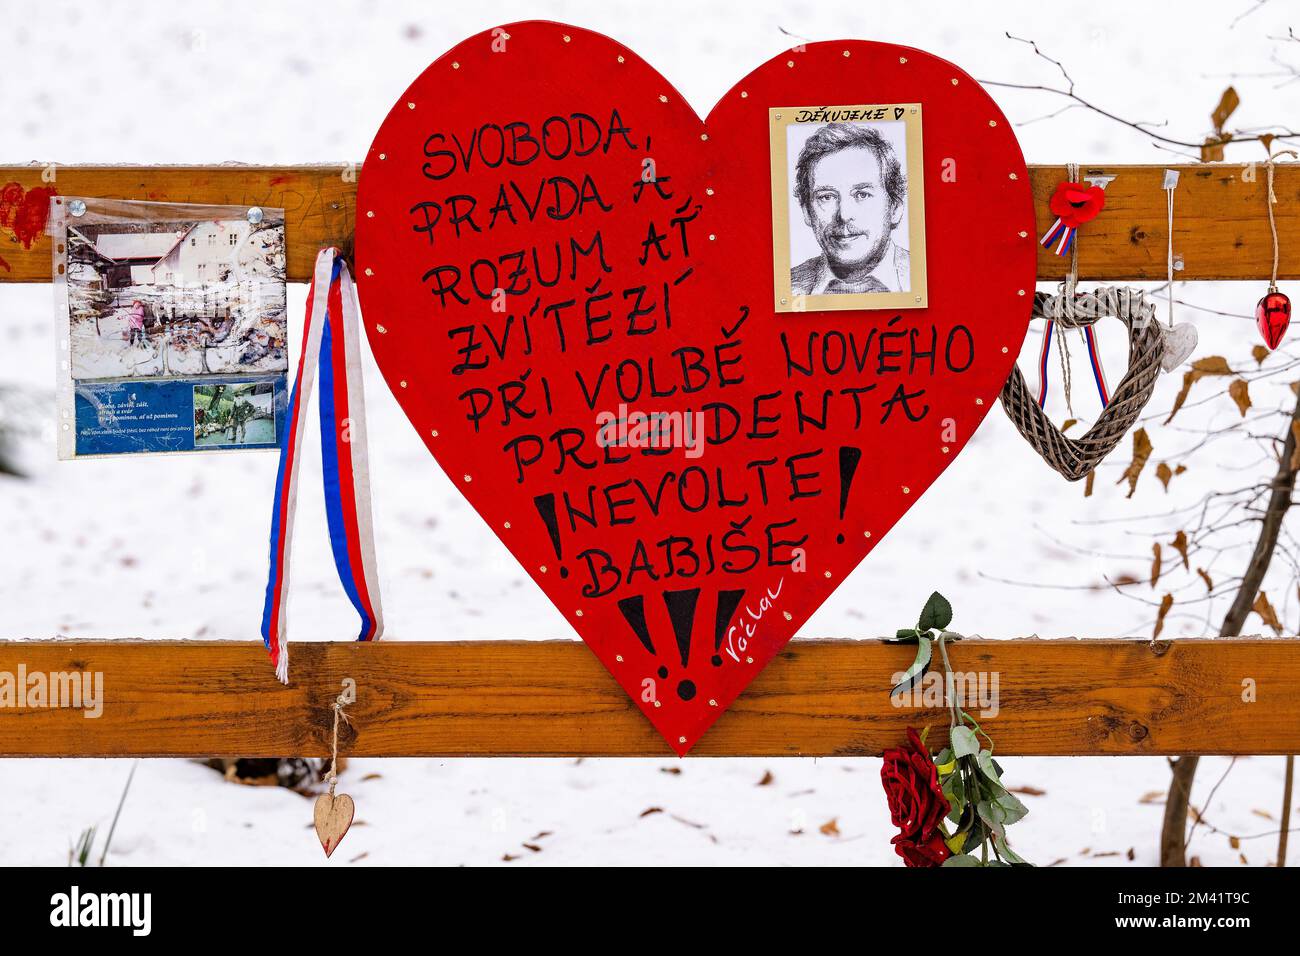 Hradecek, Czech Republic. 18th Dec, 2022. People came to place commemorative things and light candles to mark 11th anniversary of Vaclav Havel death at his countryside house in Hradecek, Czech Republic, on December 18, 2022. Credit: David Tanecek/CTK Photo/Alamy Live News Stock Photo